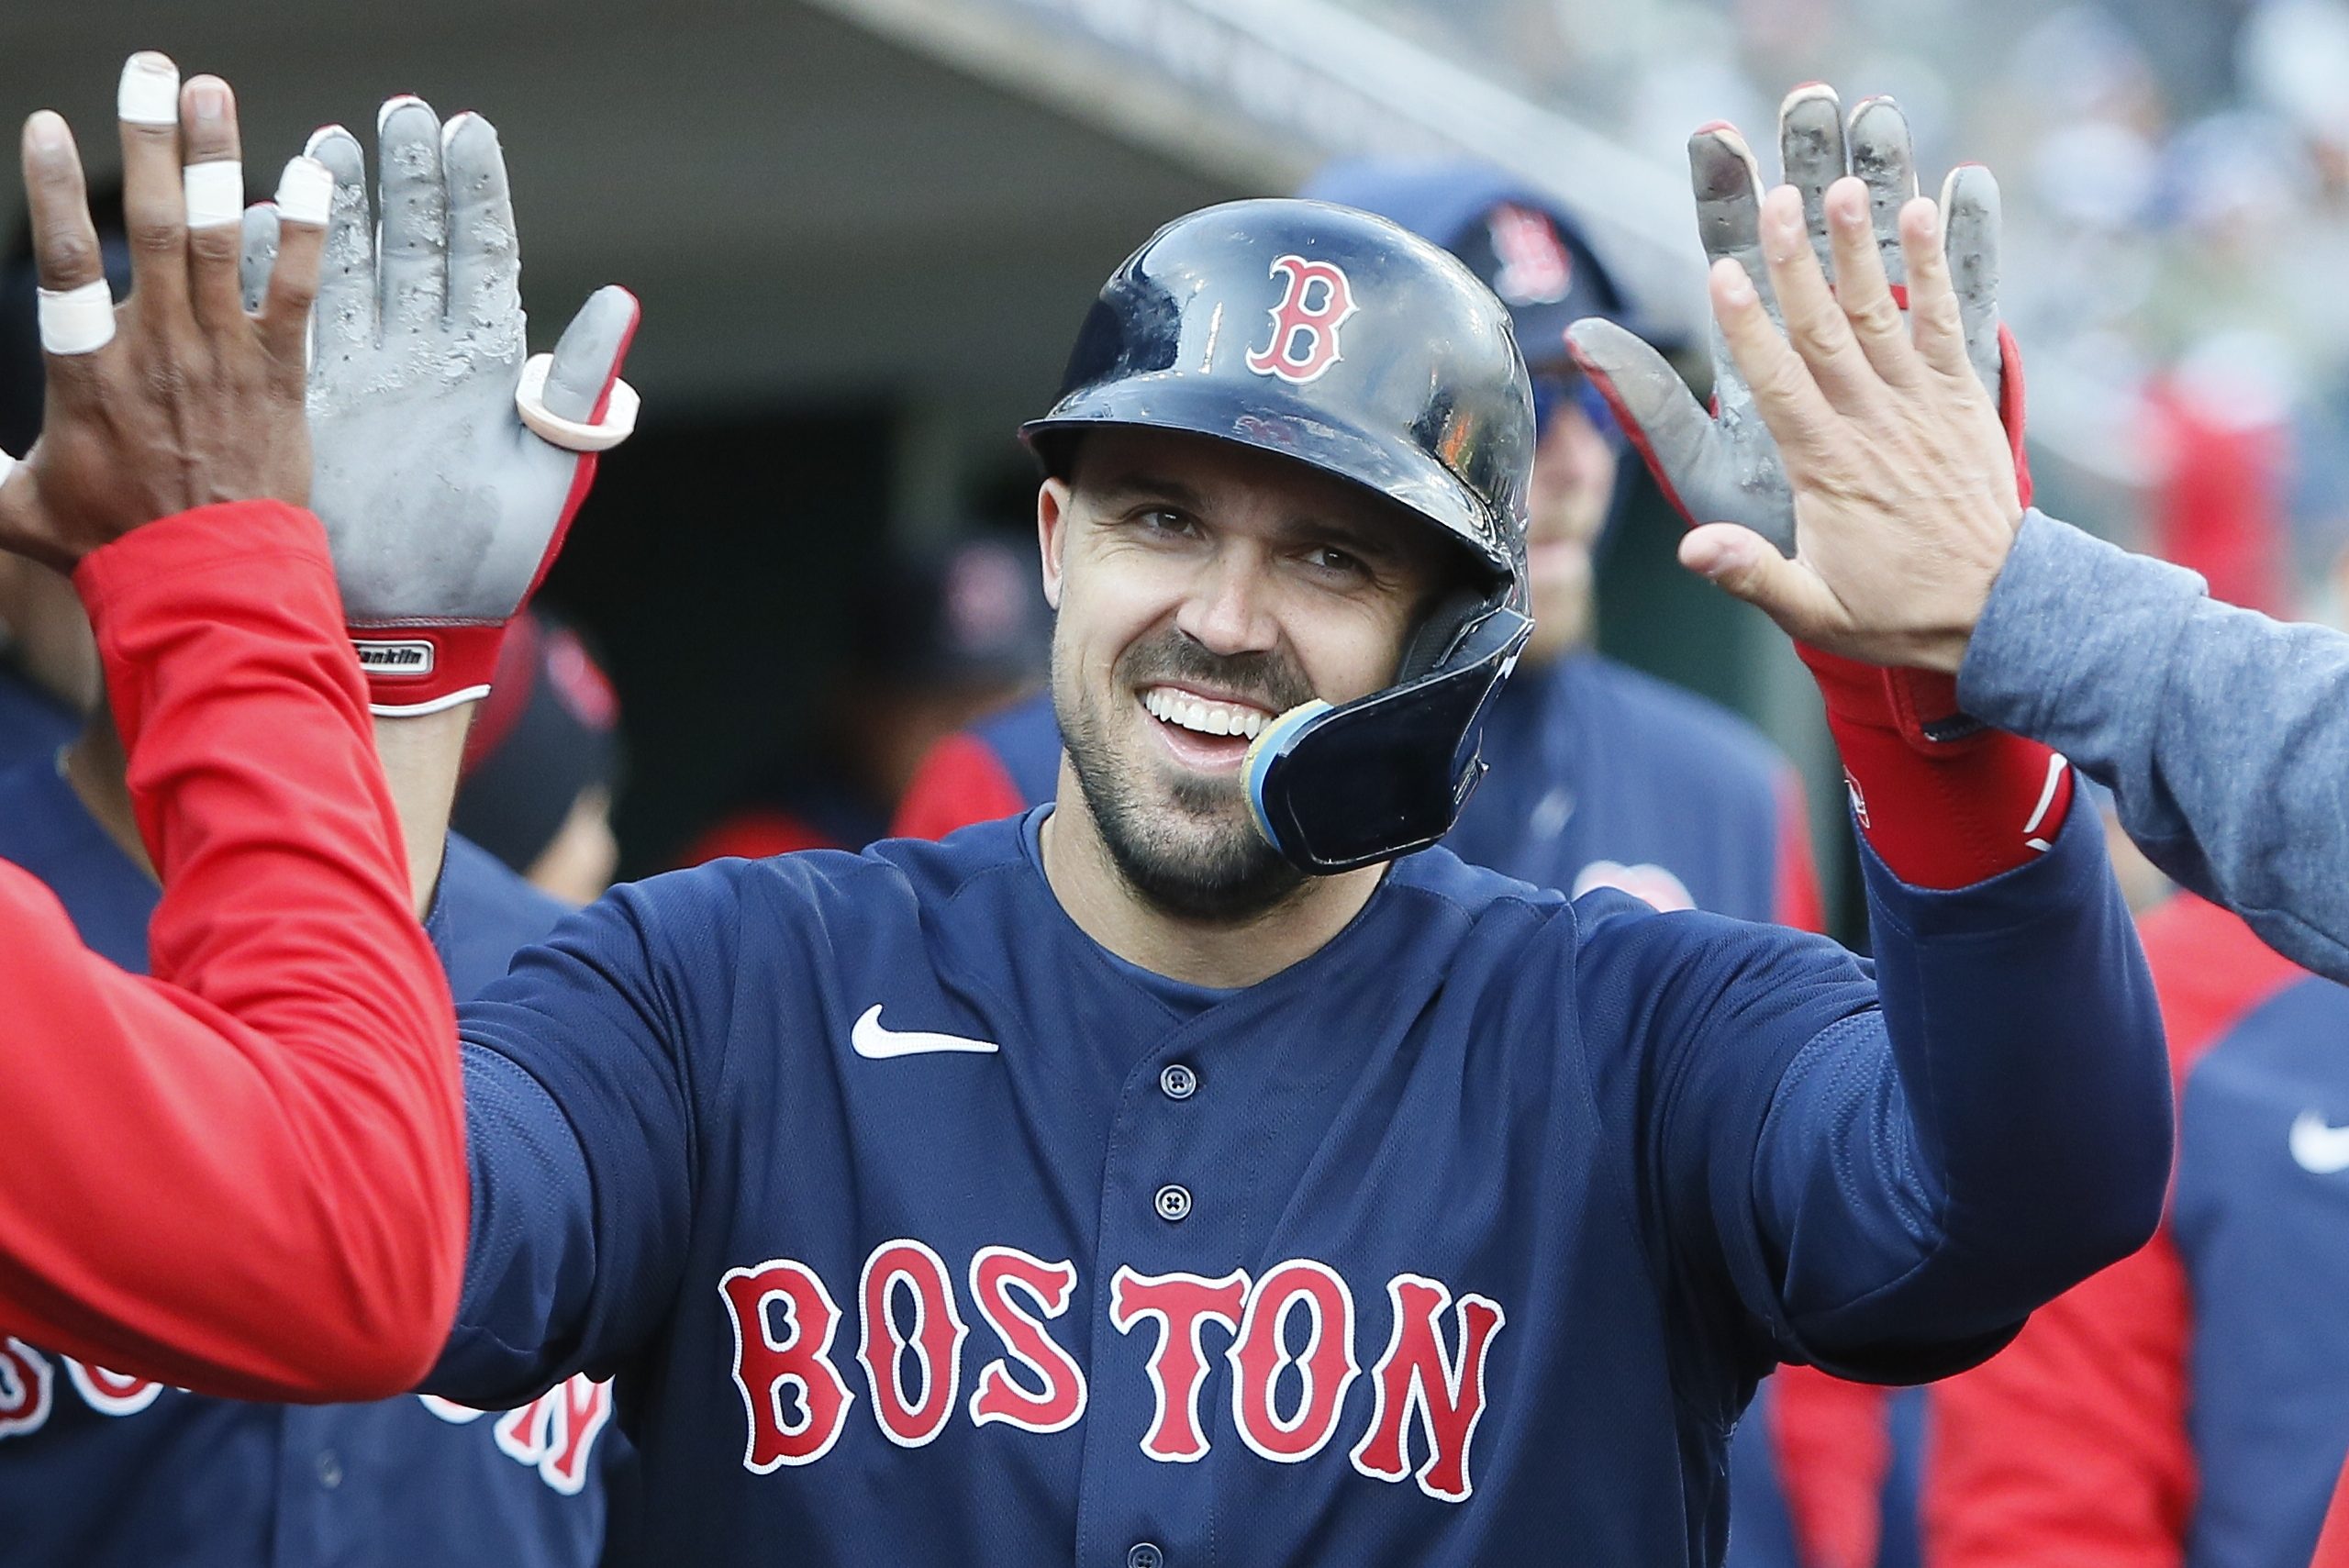 Adam Duvall of the Red Sox celebrates in the dugout after scoring.